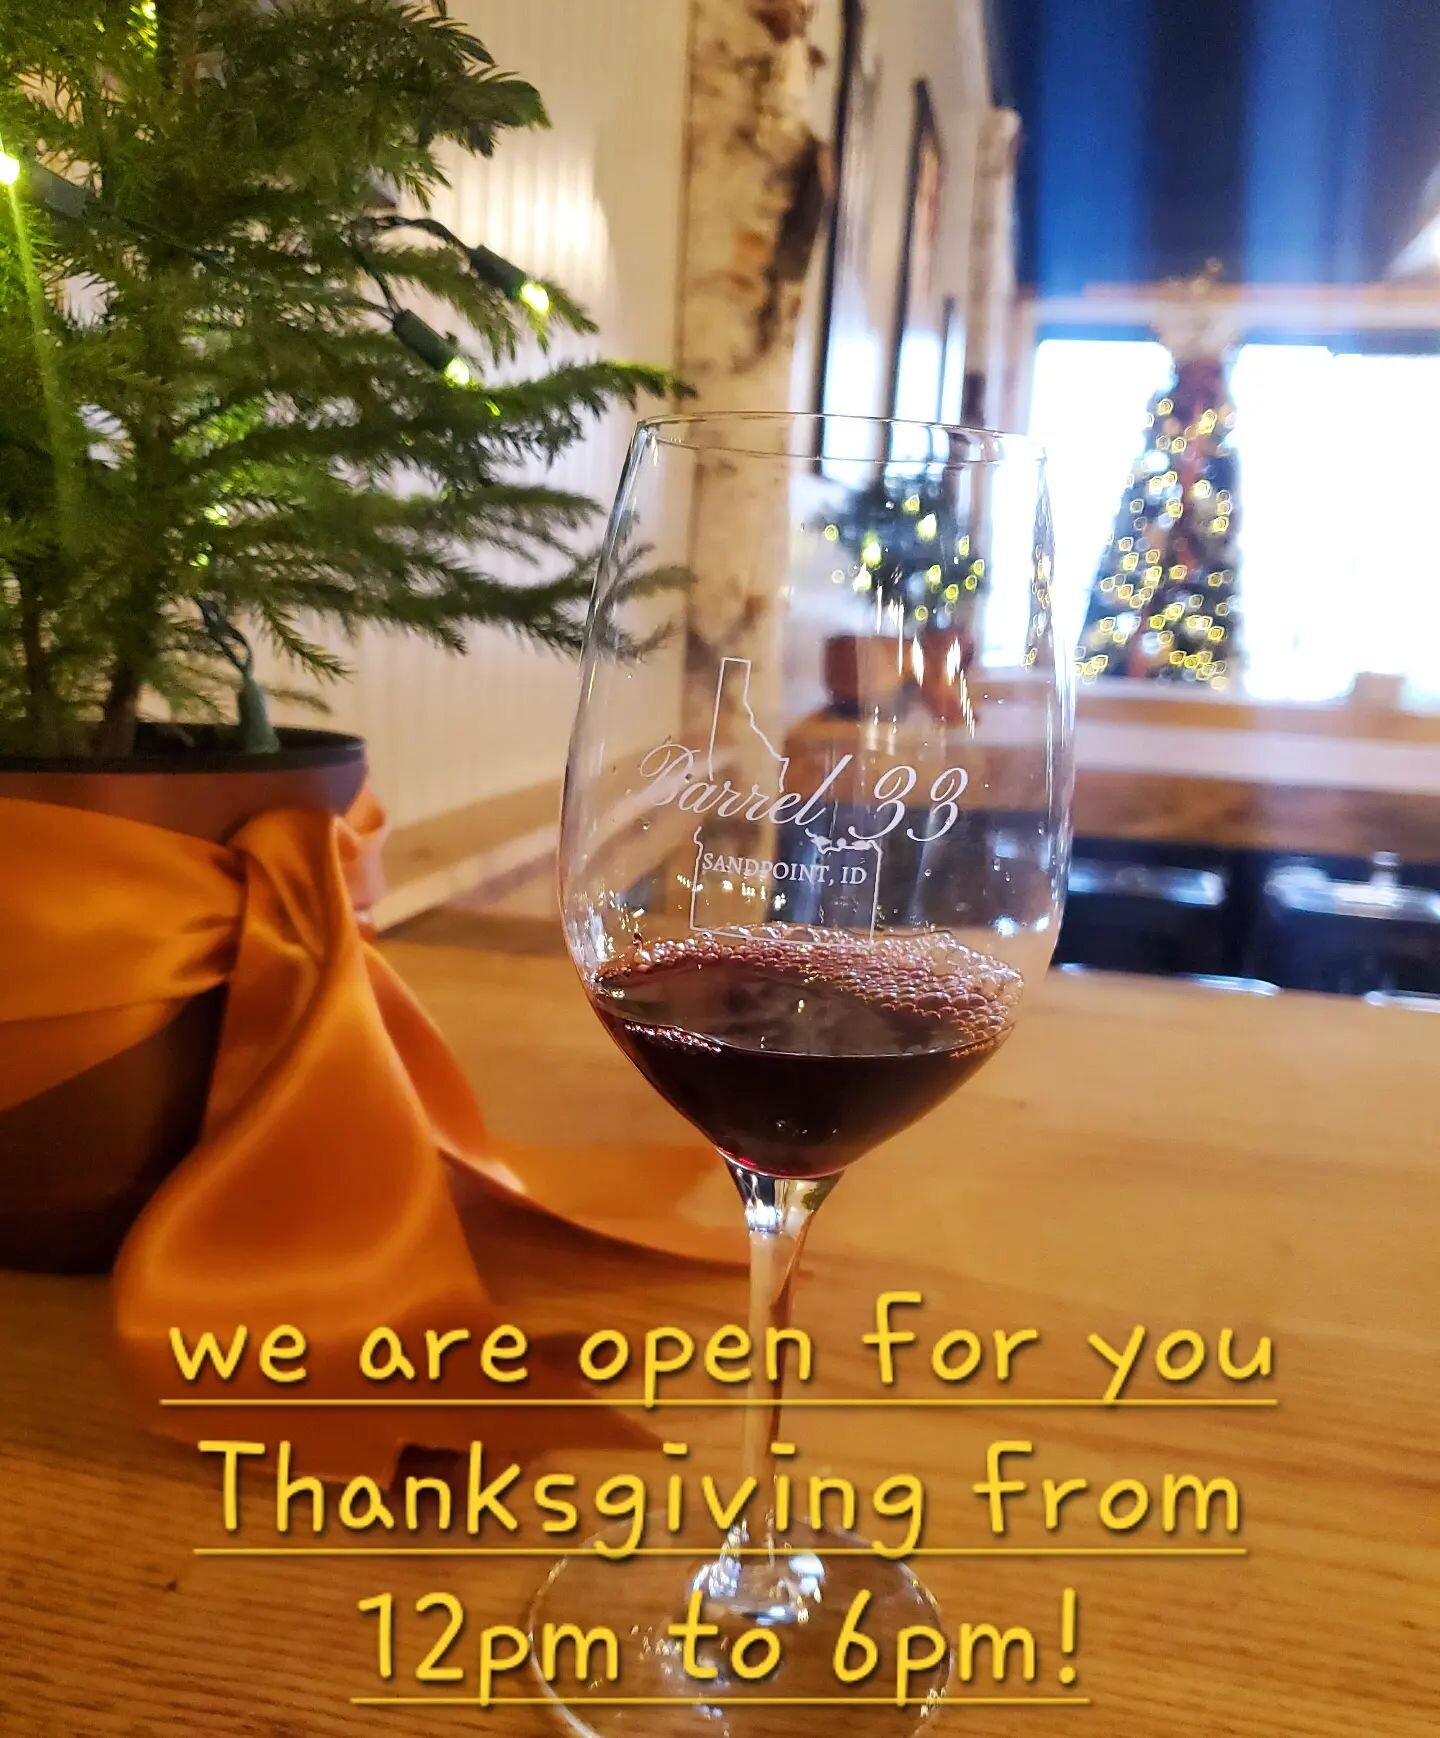 Come and hang out with us tomorrow, we will be open for you to escape your kitchen for a bit!

Open from 12pm to 6pm, let us help you settle in to the Holidays.